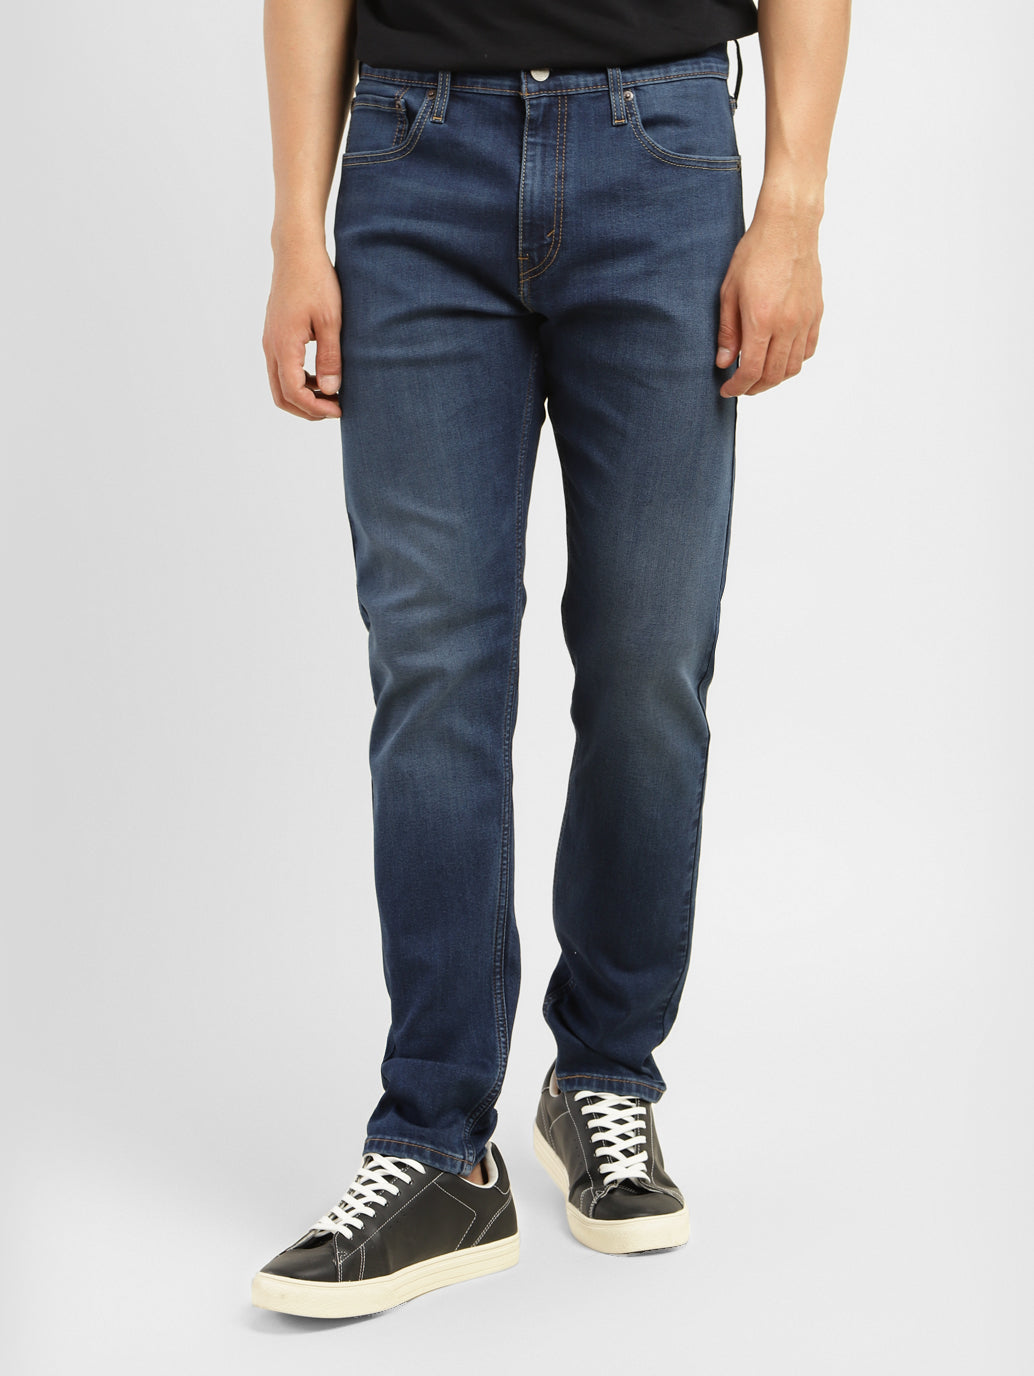 Shop Online for Men's Slim Tapered Jeans | Levi's India – Page 3 ...